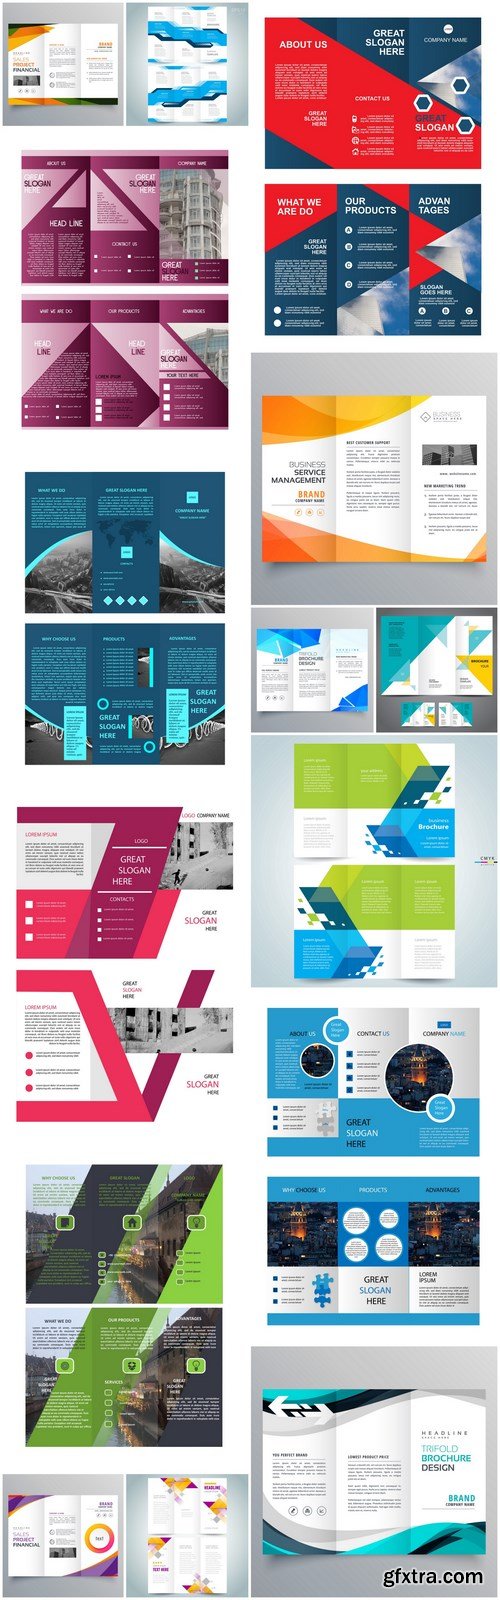 Trifold Brochure Template - 15 Vector